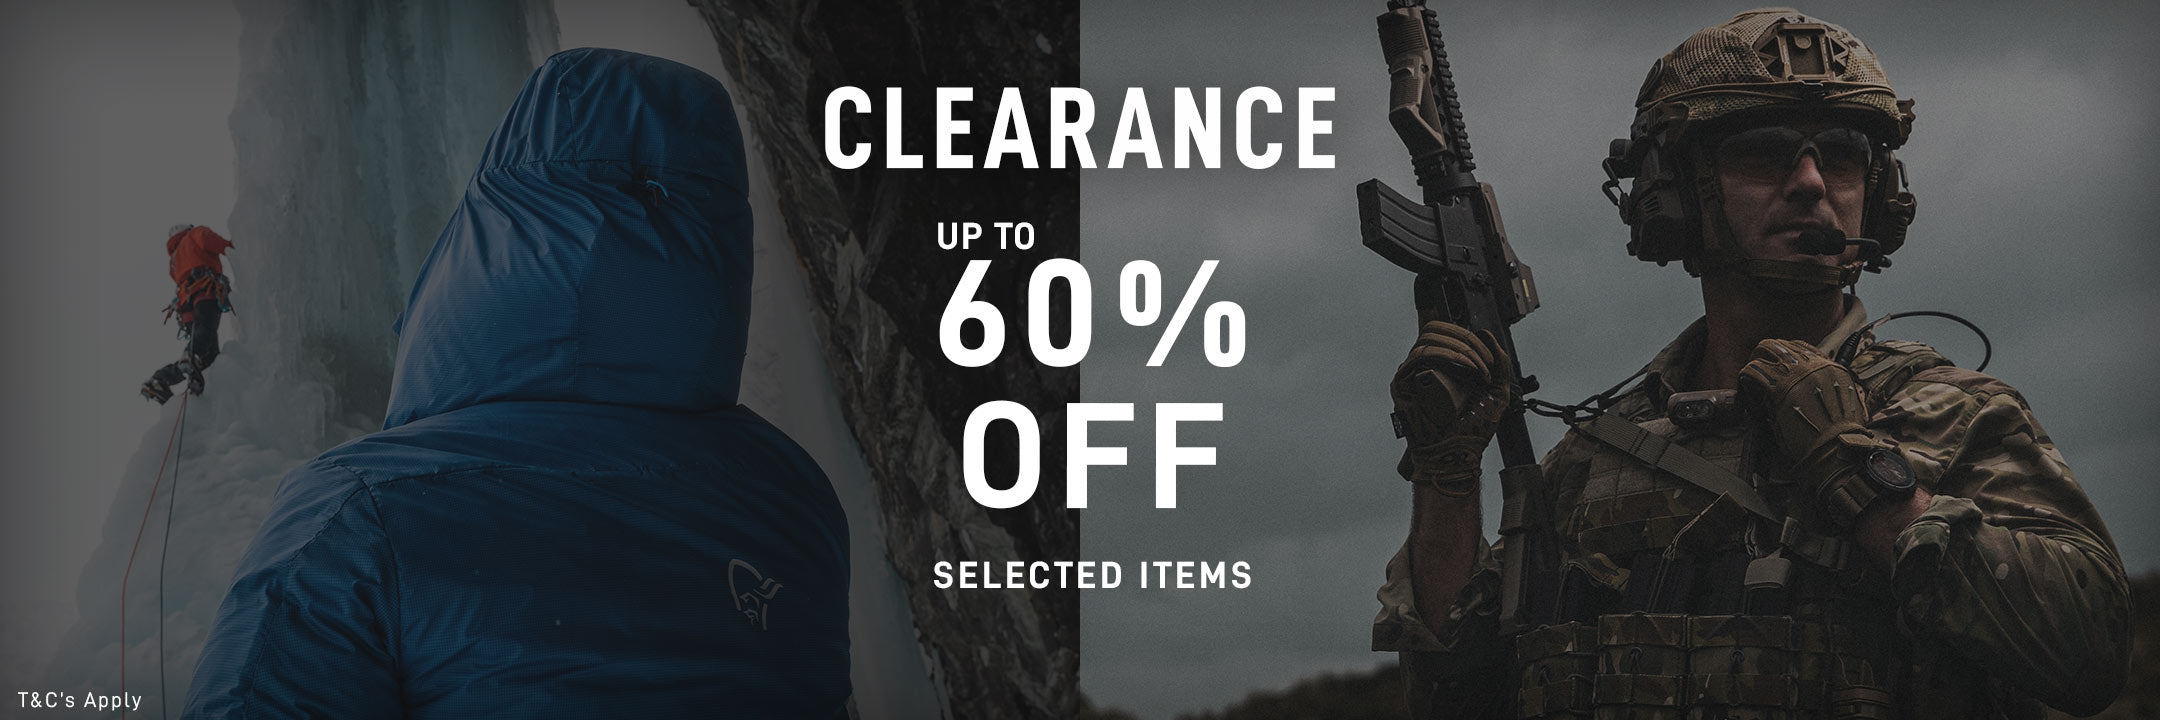 Clearance up to 60% off